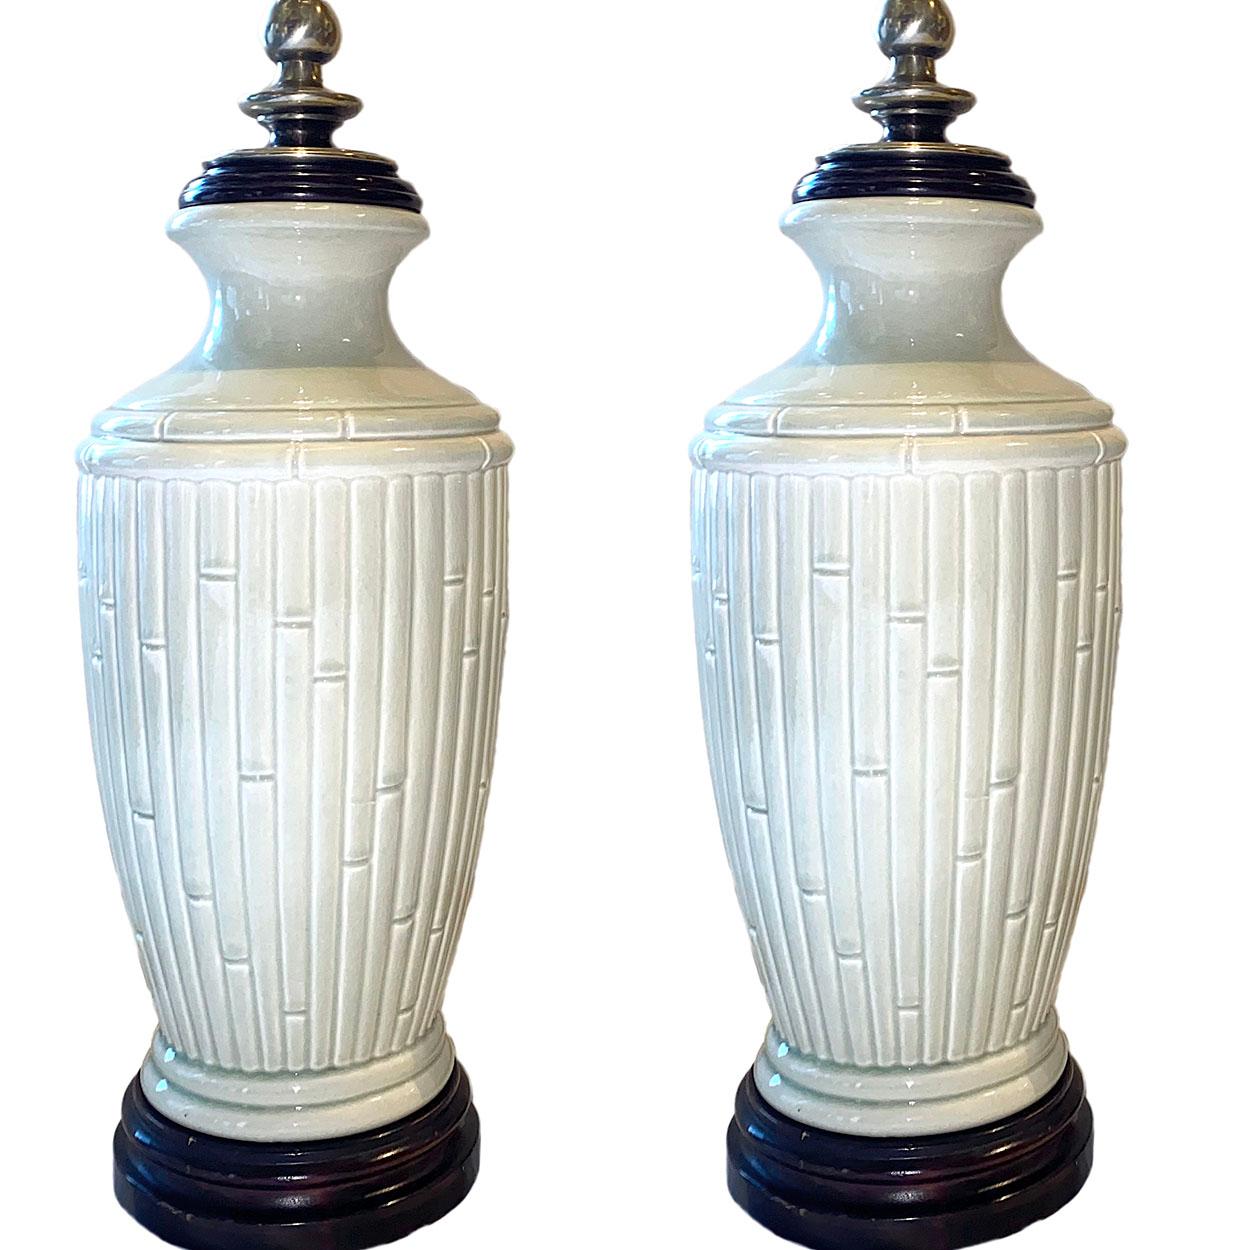 A pair of circa 1960's French table lamps with a bamboo design on the glazed porcelain body.

Measurements:
Height to shade rest: 31